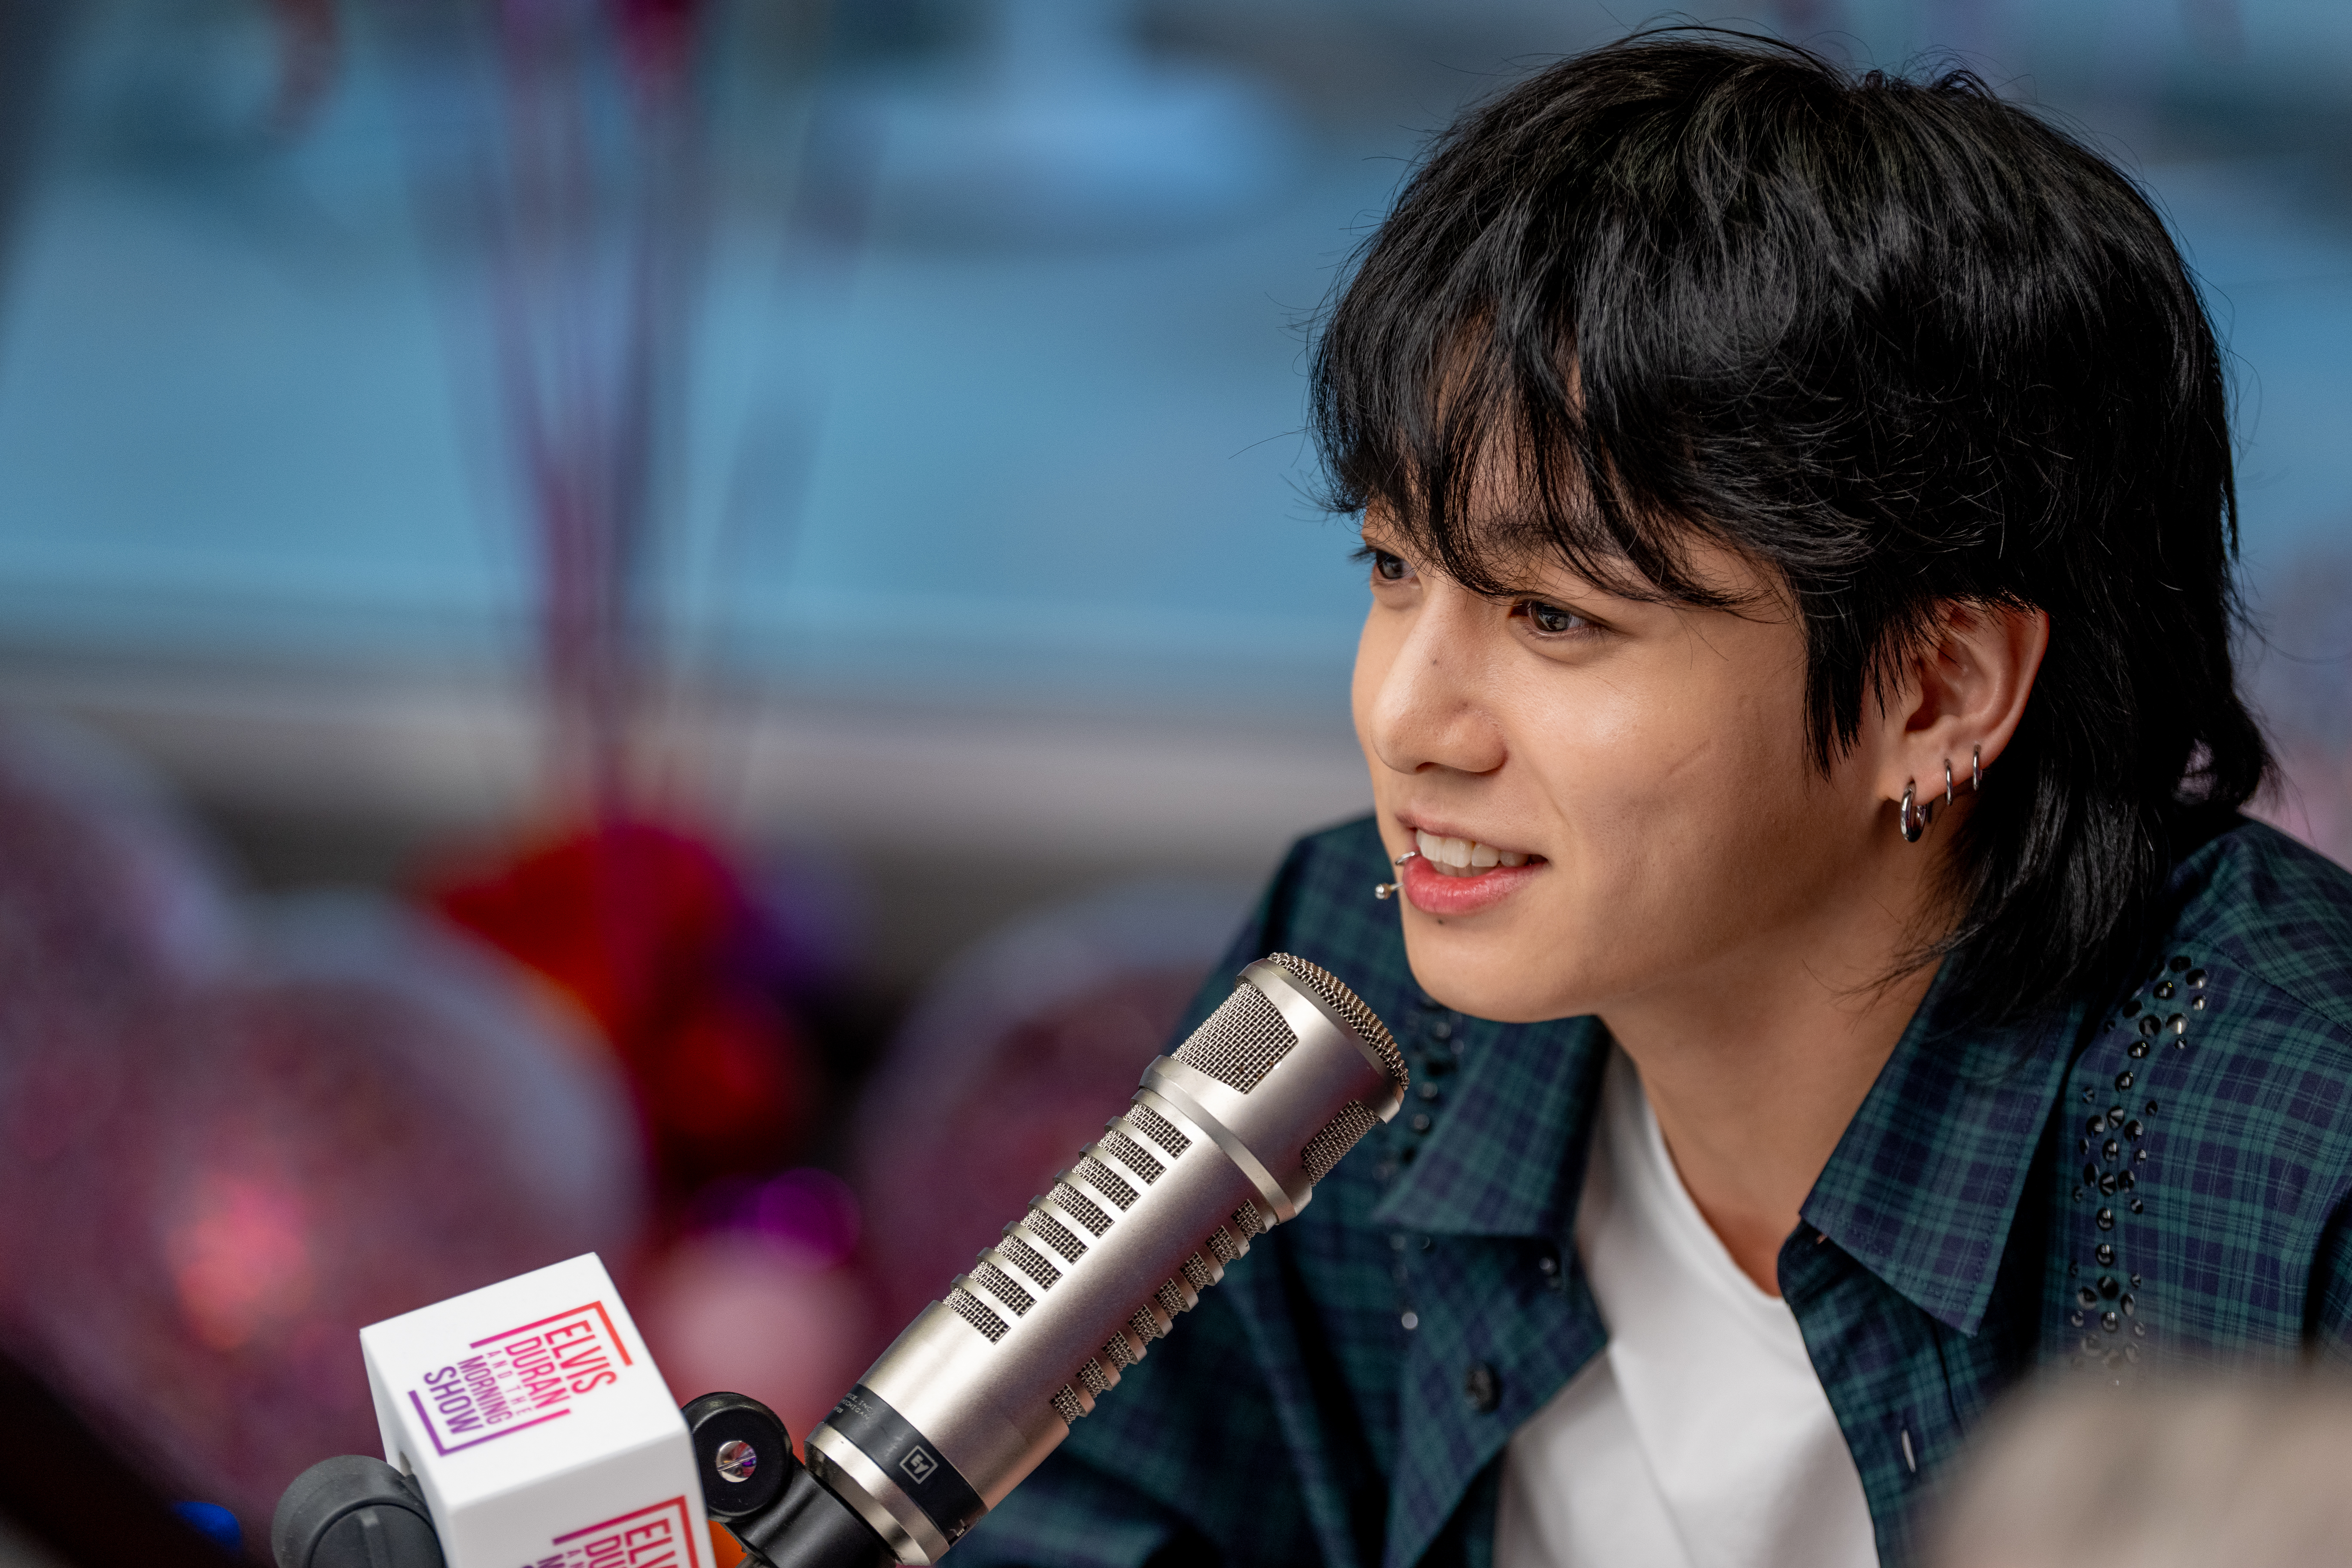 Jung Kook attending the "Elvis Duran And The Morning Show" on July 17, 2023 in New York. | Source: Getty Images